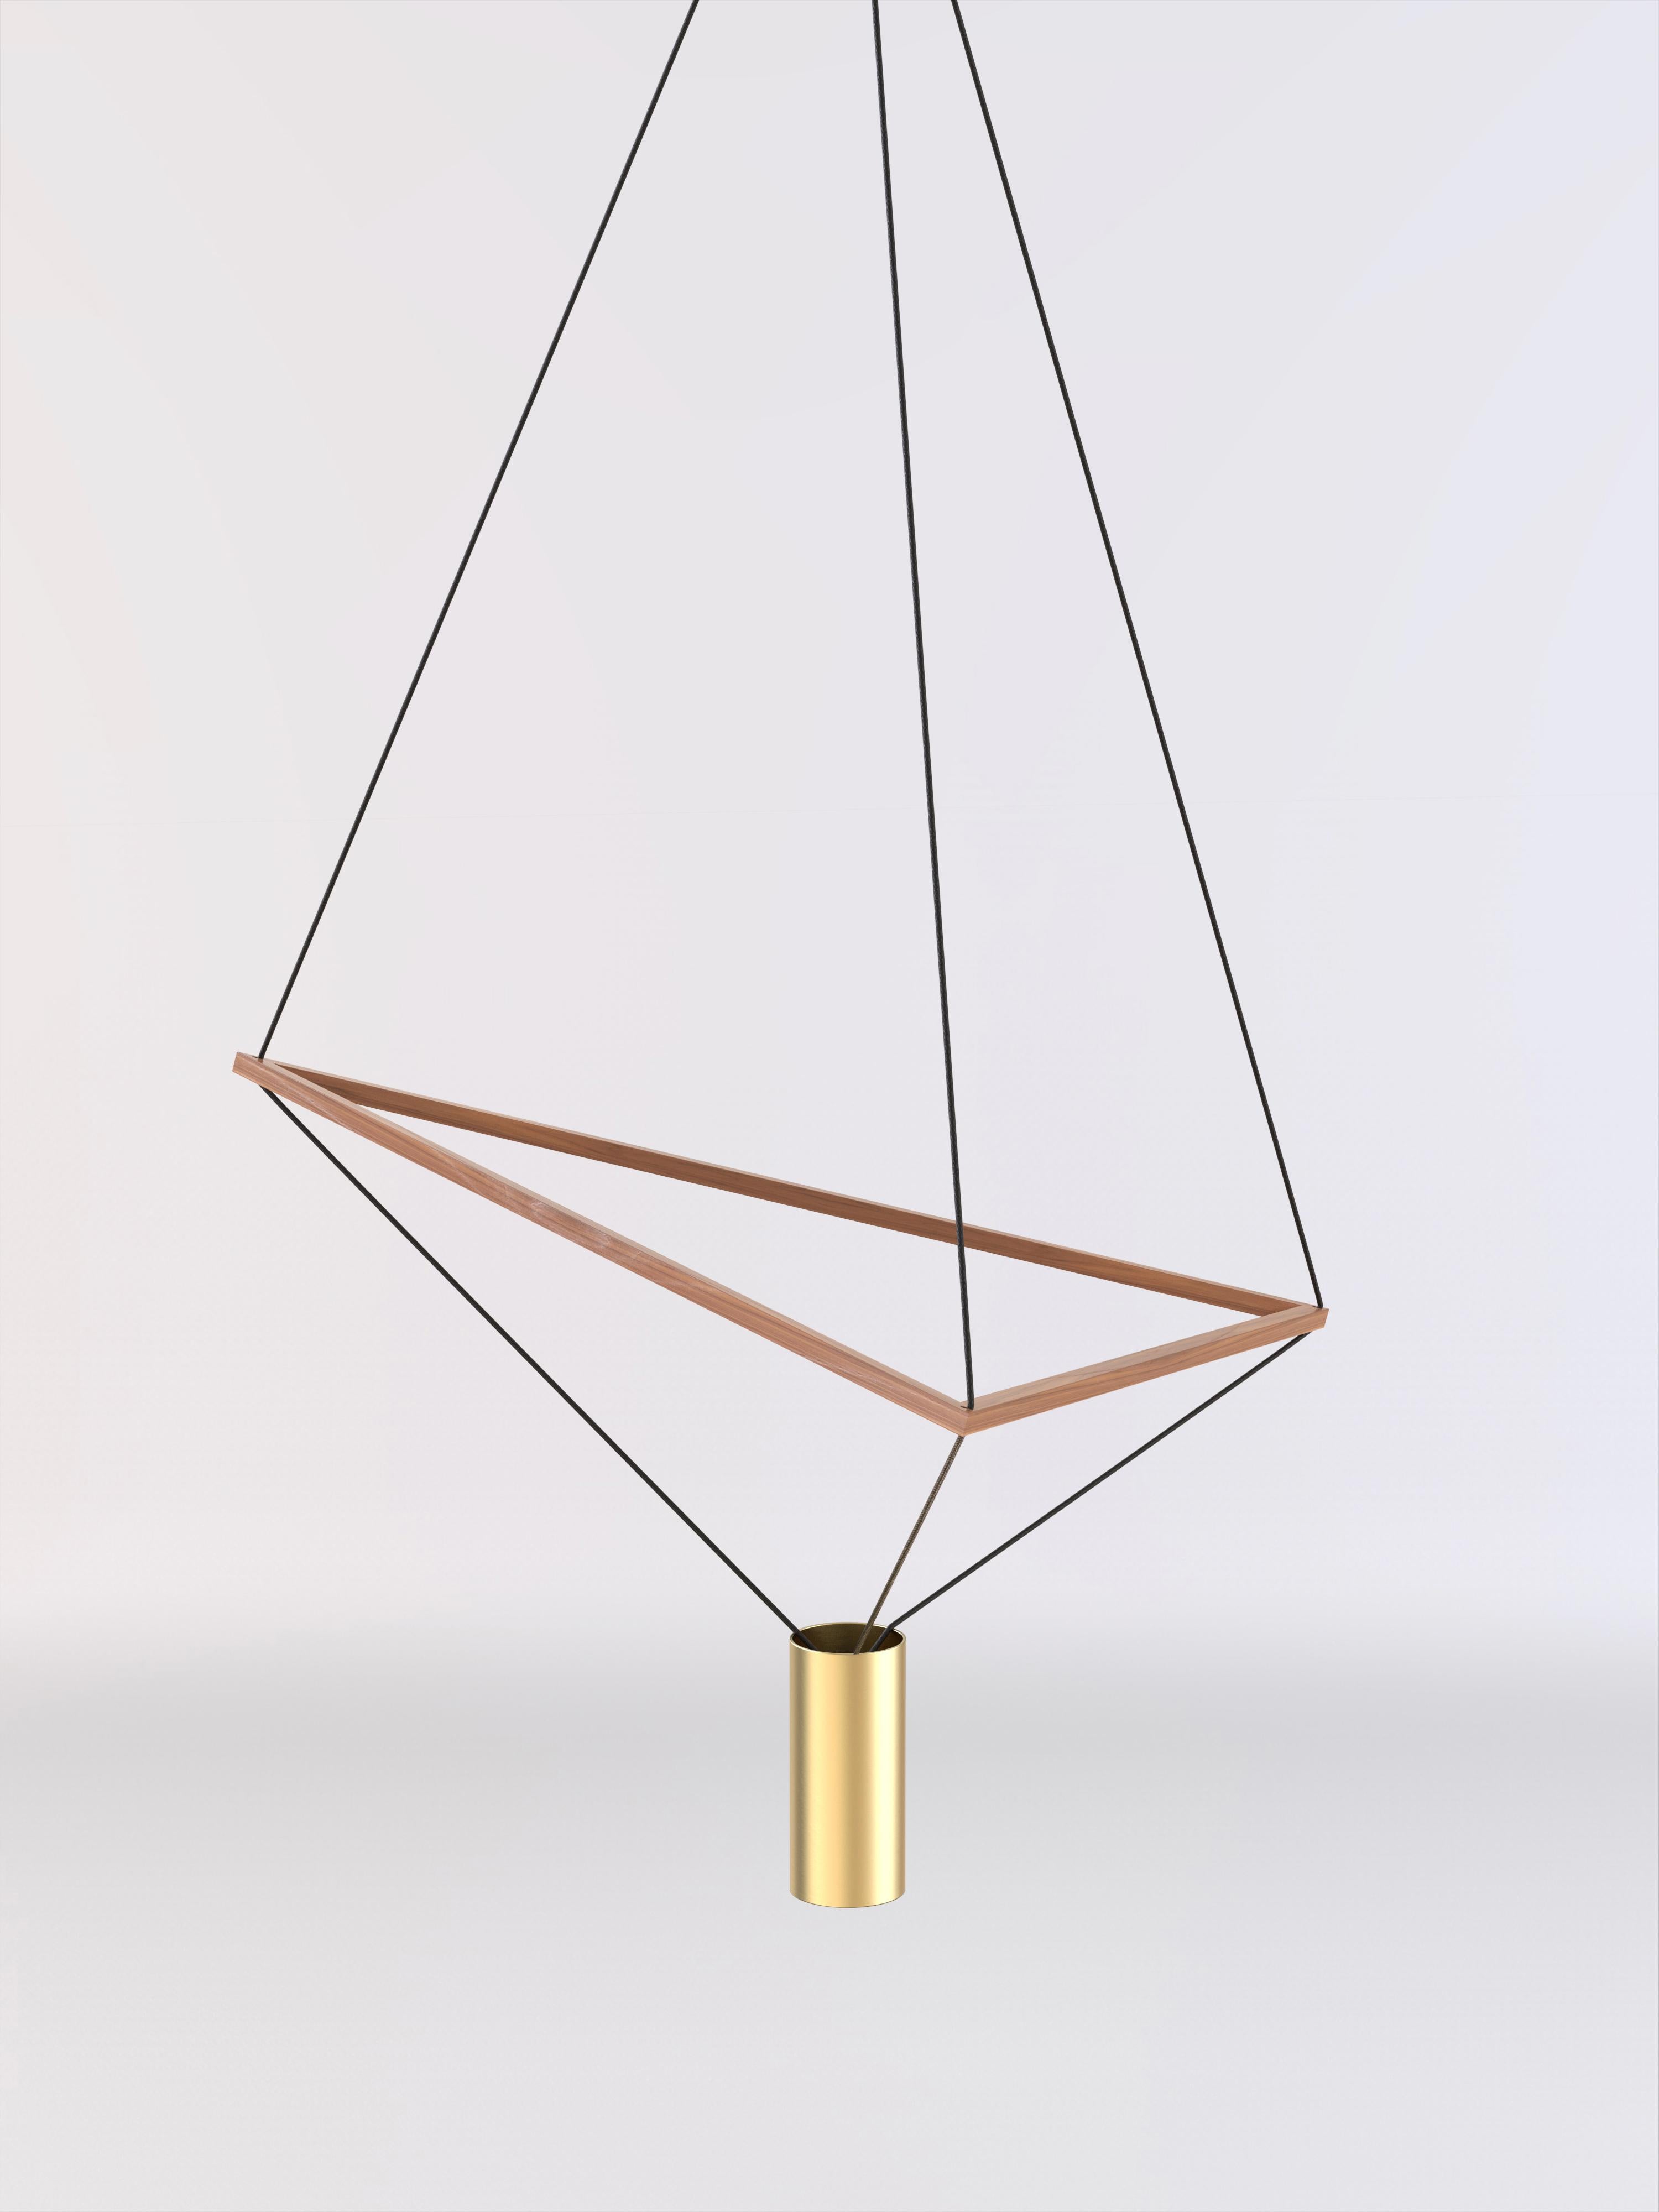 Ceiling lamp with natural wood structure and brushed brass lampshade.
The wooden triangular structure can be freely tilted allowing the lamp's shape to generate multiple geometrical forms.